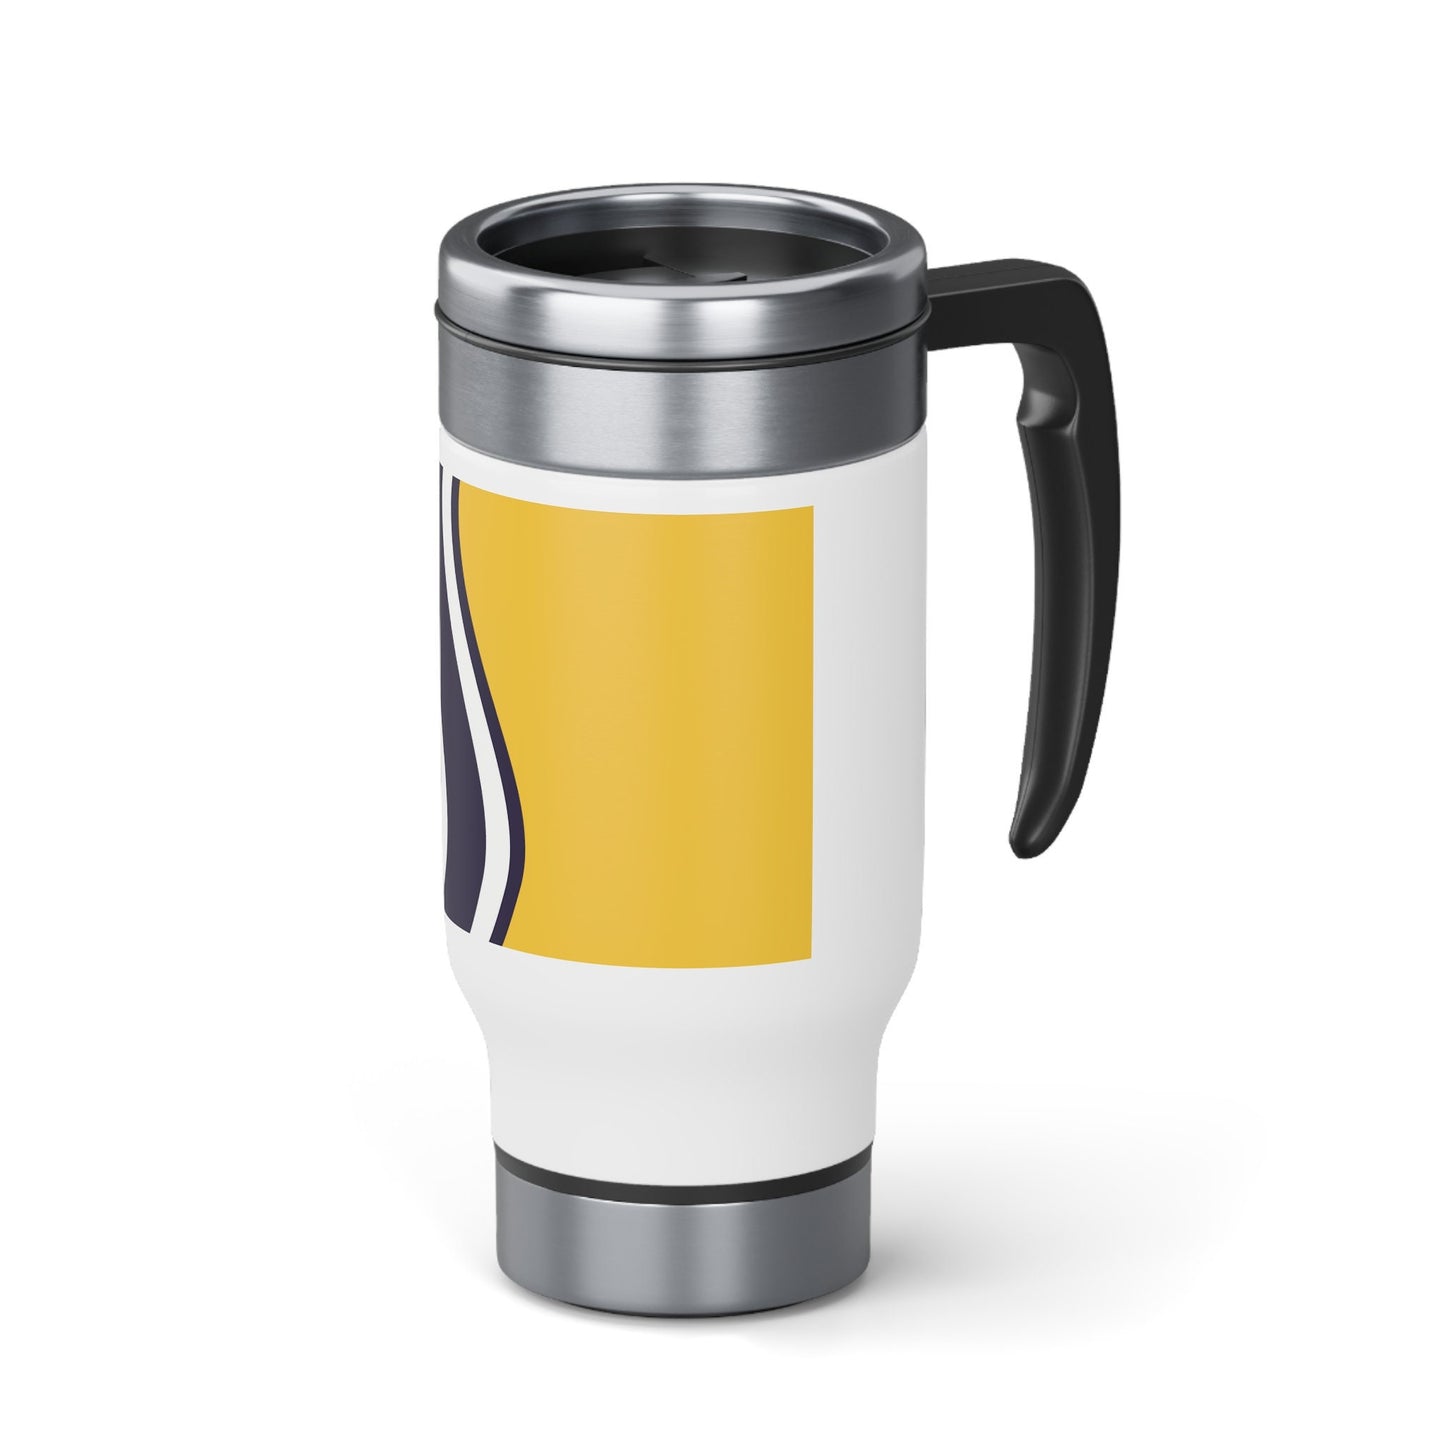 South Bend Indiana city Flag Stainless Steel Travel Mug with Handle, 14oz